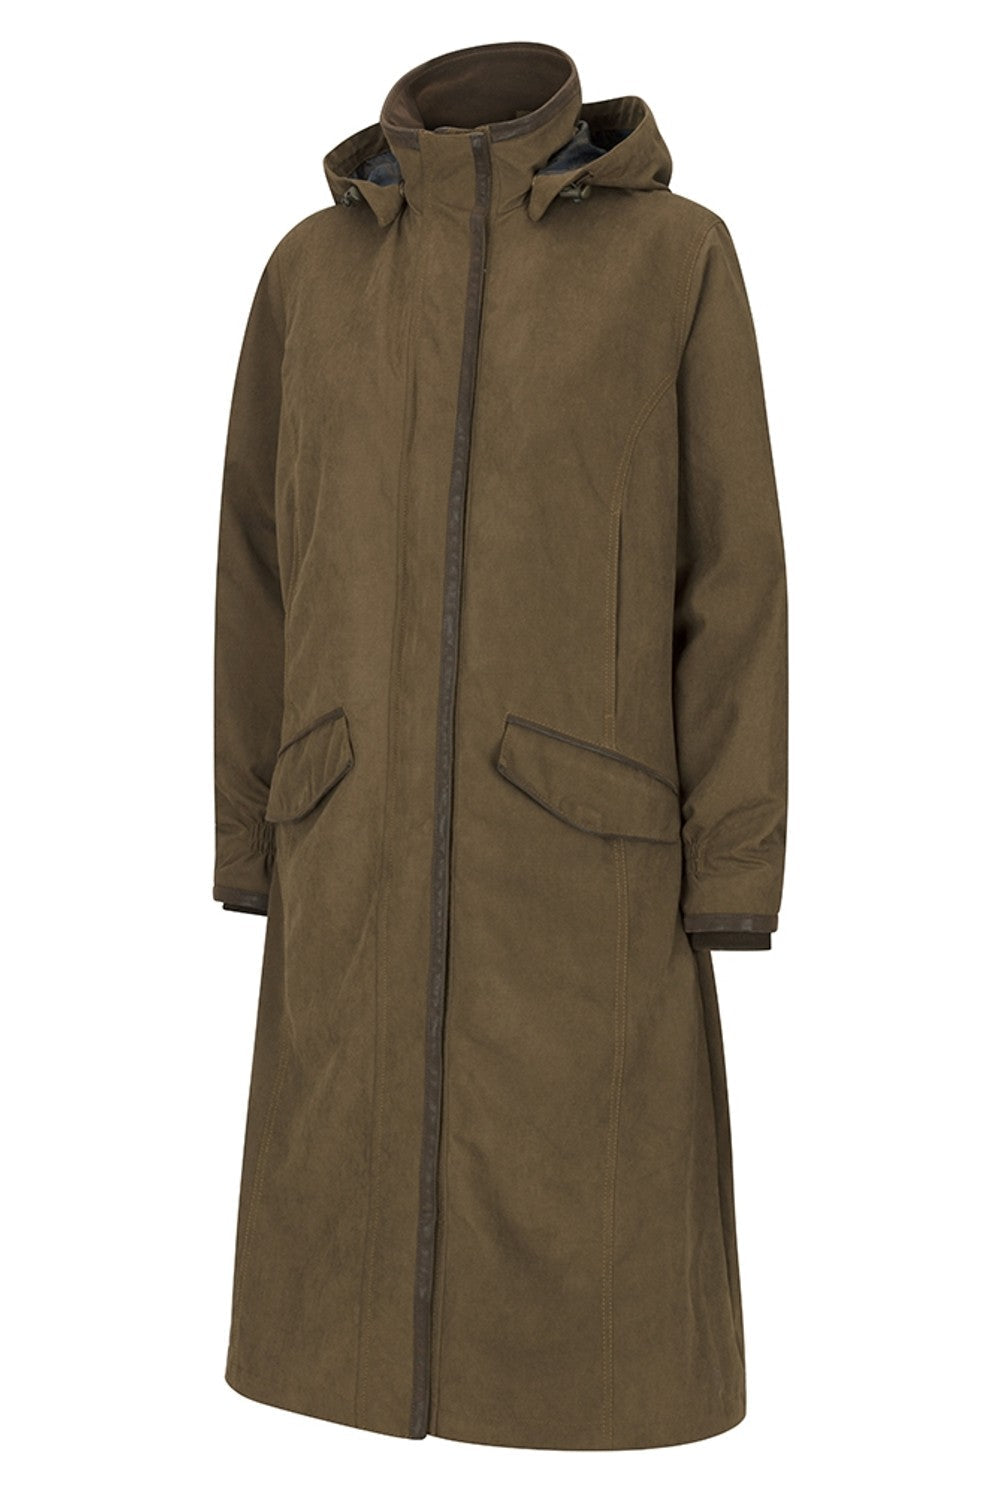 Hoggs of Fife Struther Ladies Long Riding Coat in Sage 